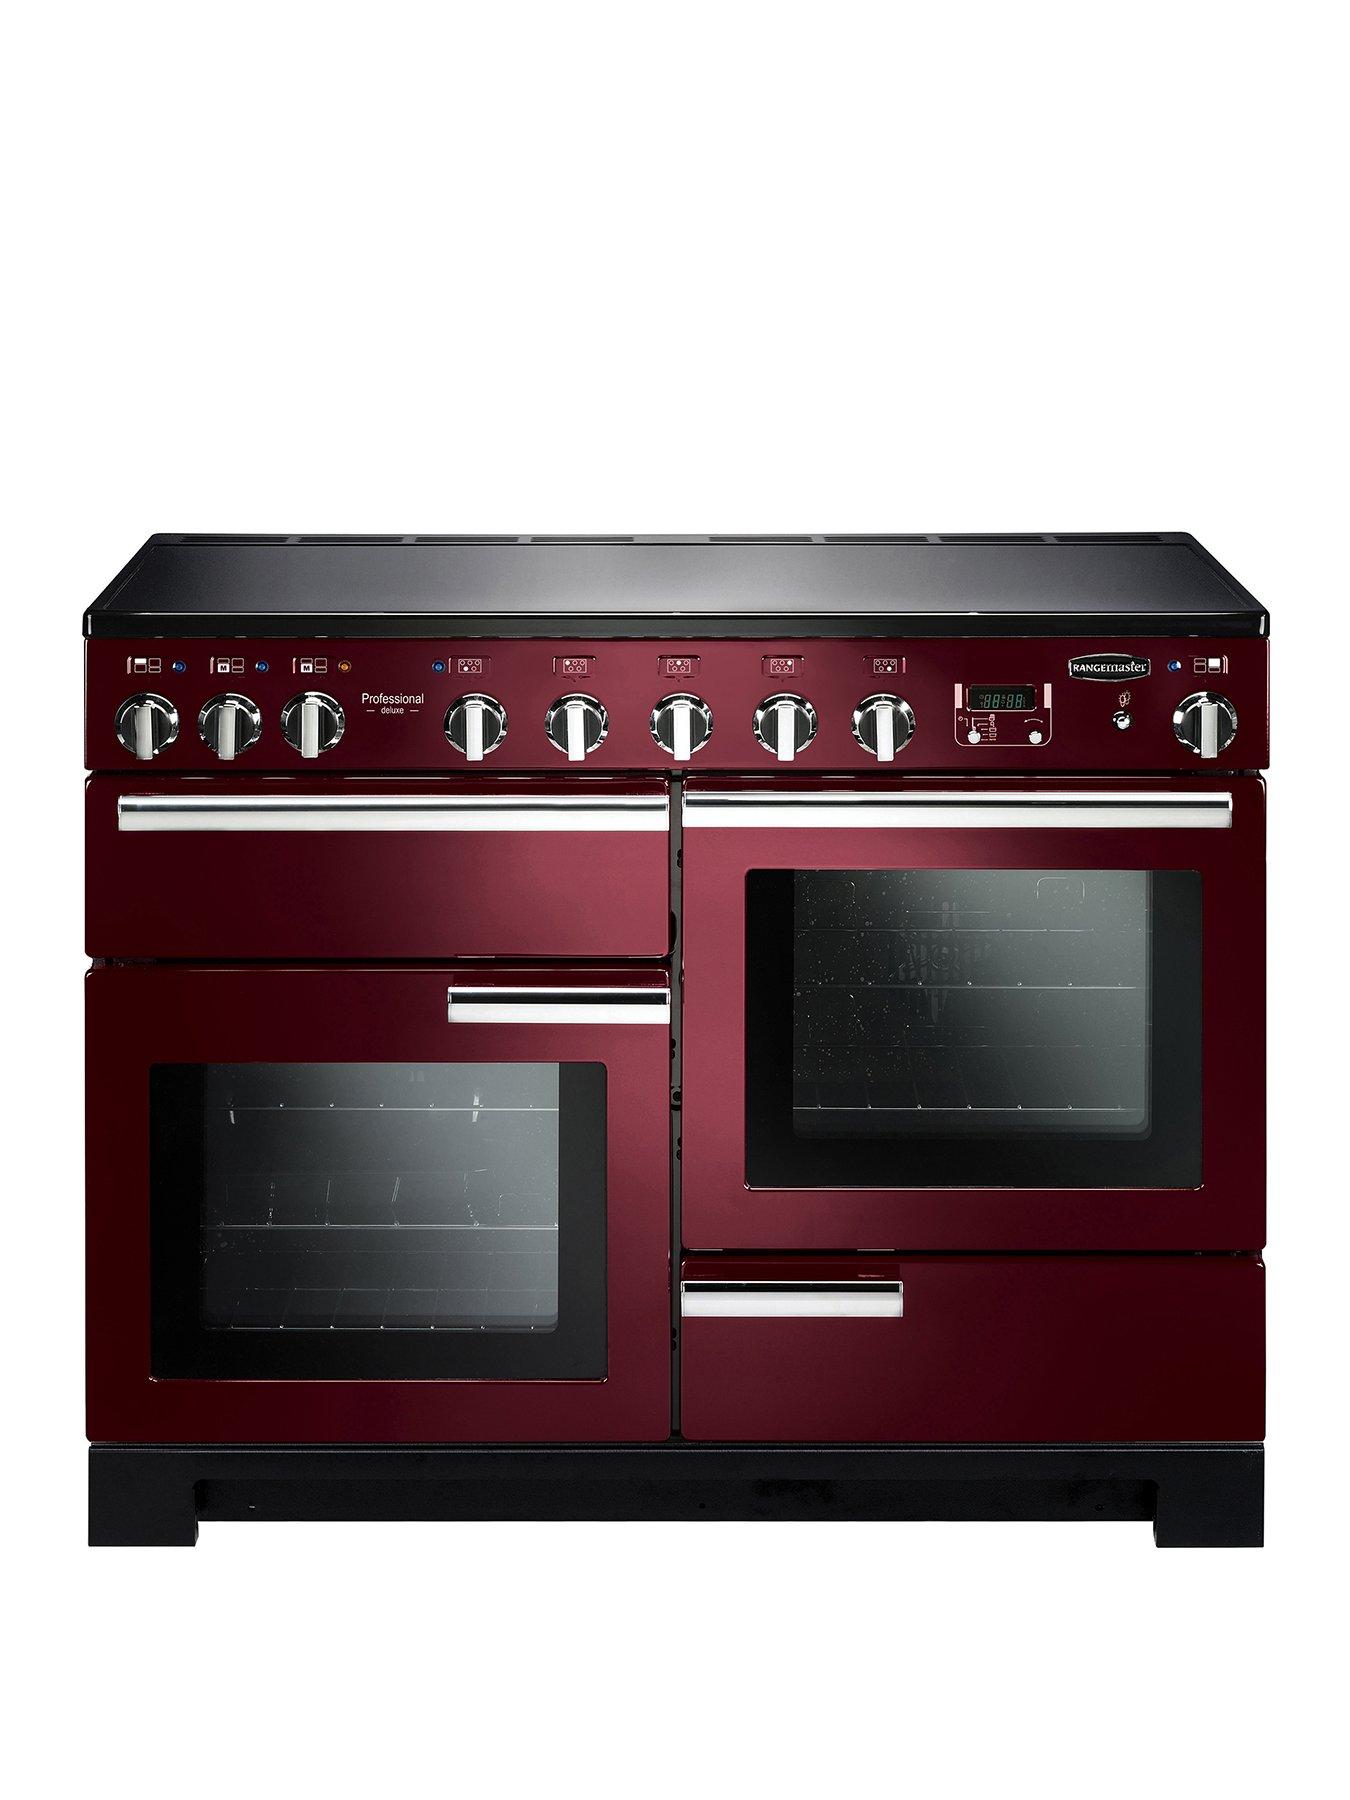 Rangemaster  Pdl110Eicy Professional Deluxe 110Cm Wide Electric Range Cooker With Induction Hob – Cranberry